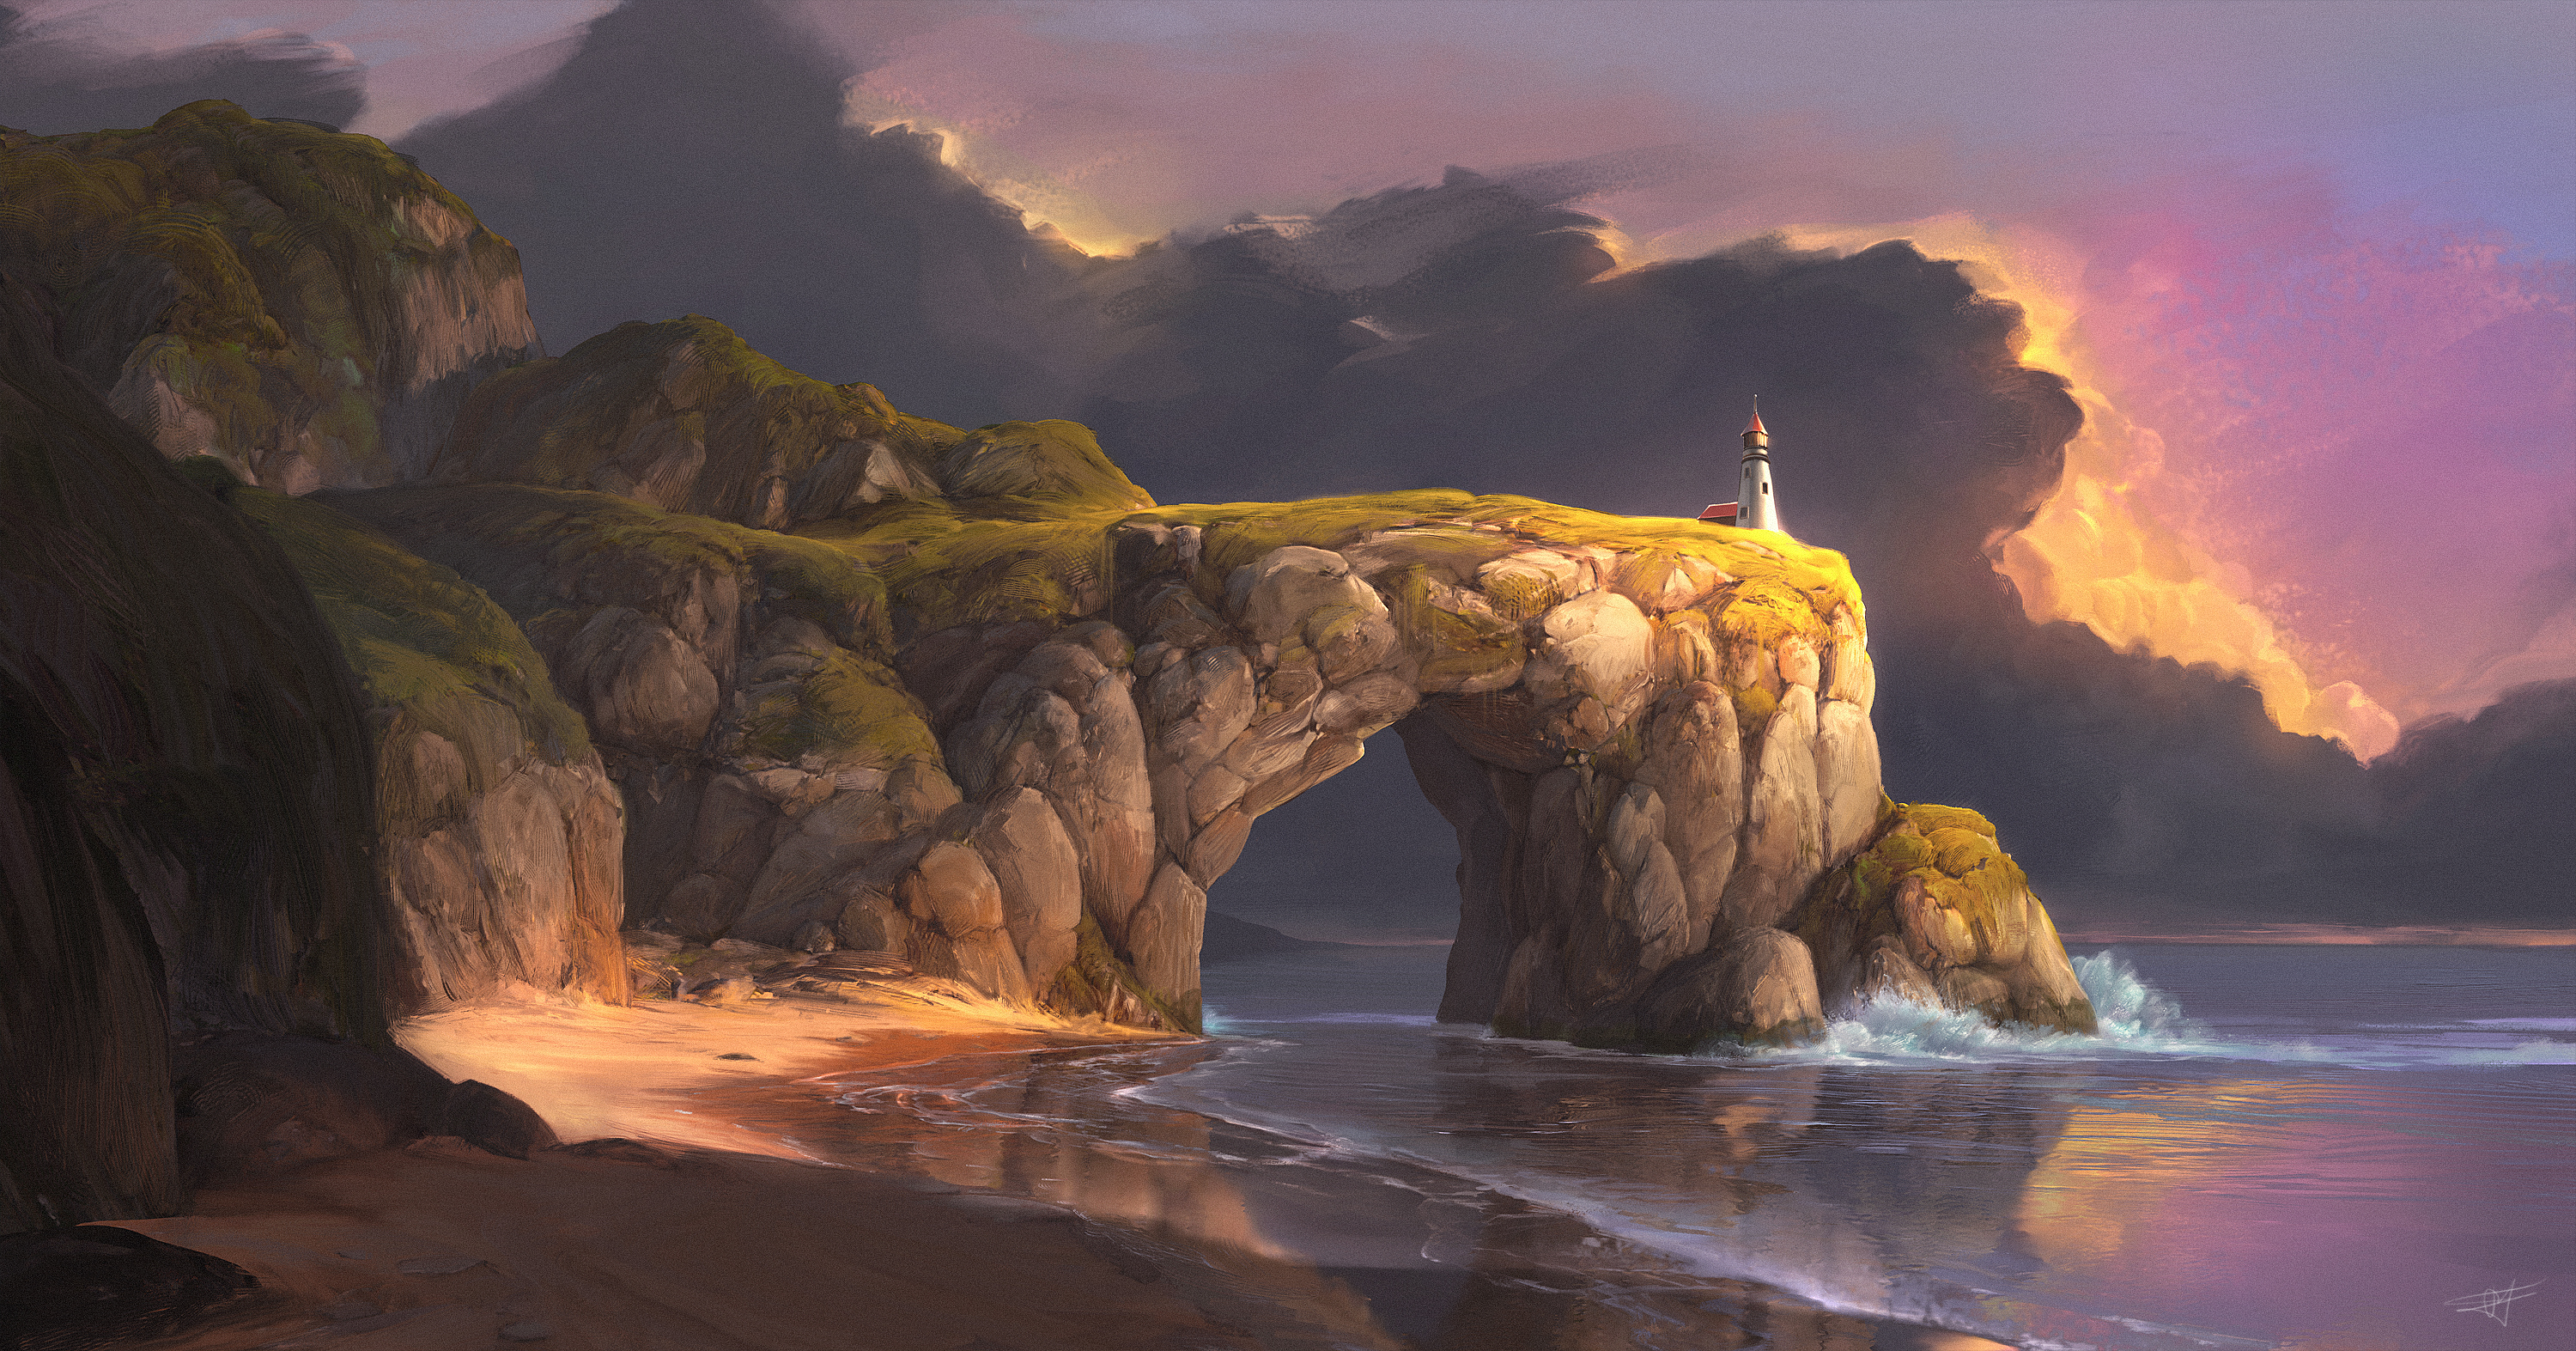 General 3000x1573 digital art artwork illustration environment nature landscape clouds cliff beach sea rock formation sunset waves lighthouse water reflection sunset glow